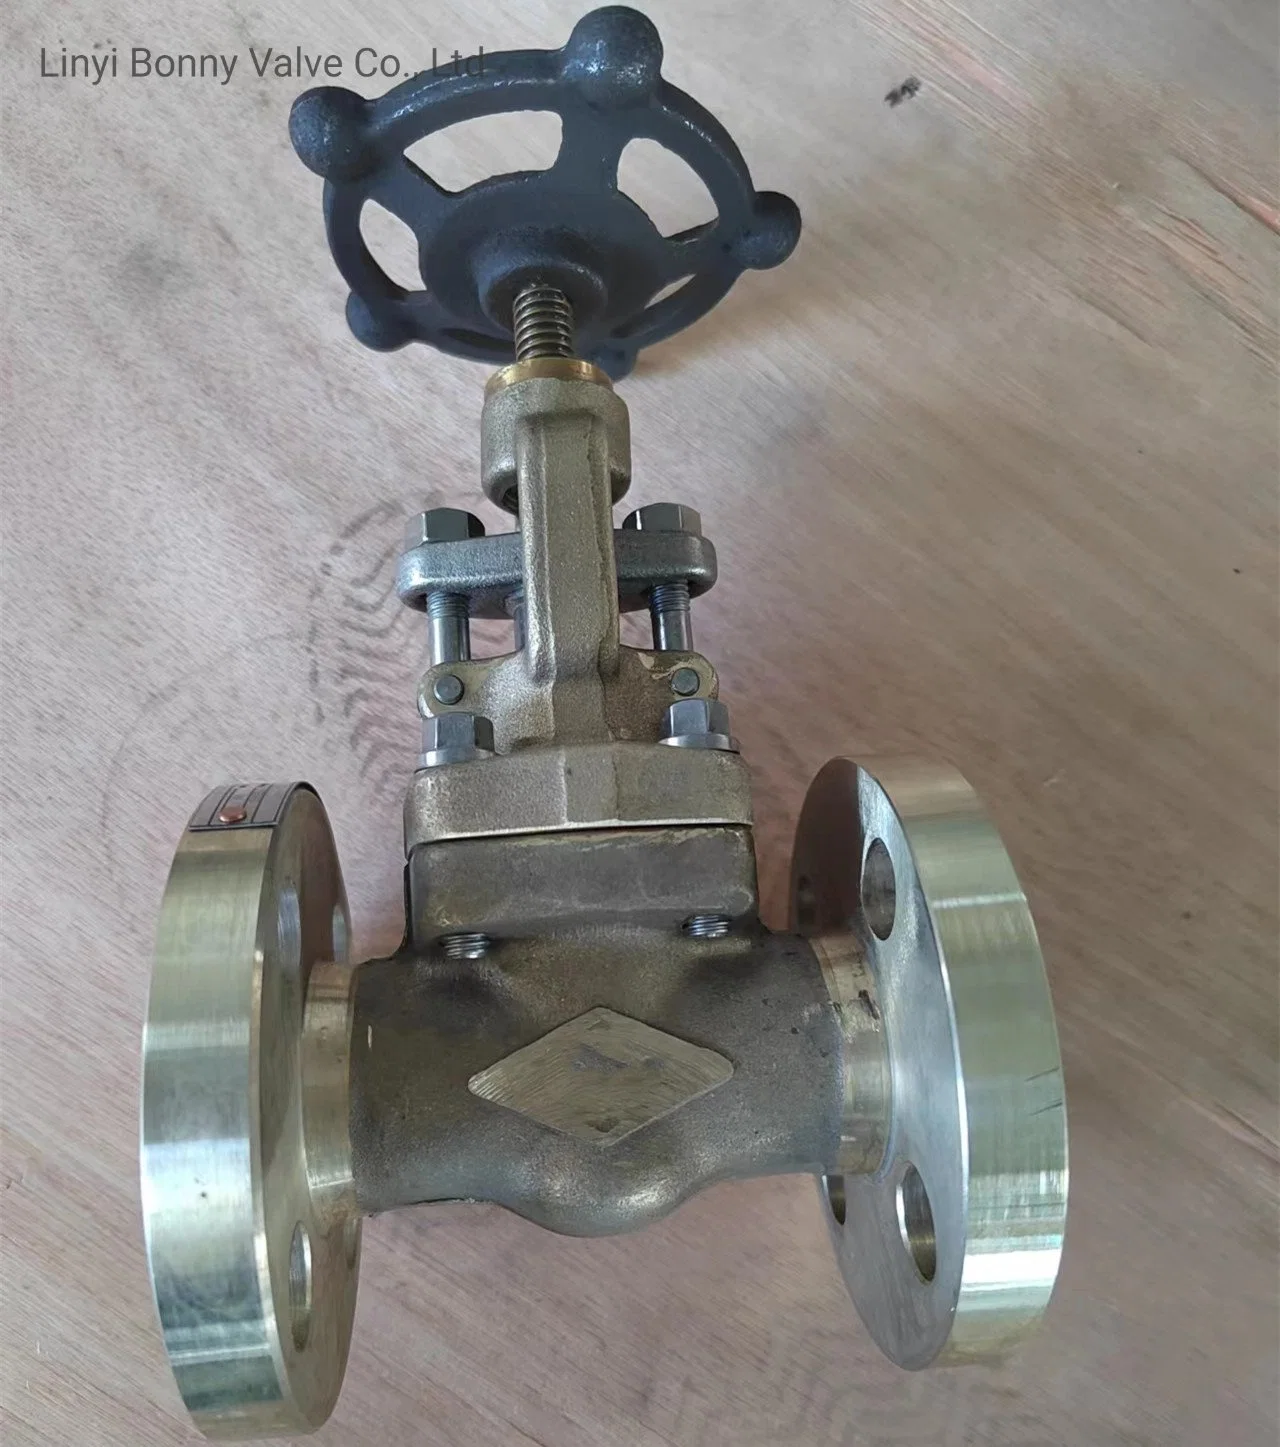 Double Flanges Globe Valve with A105 1500lb